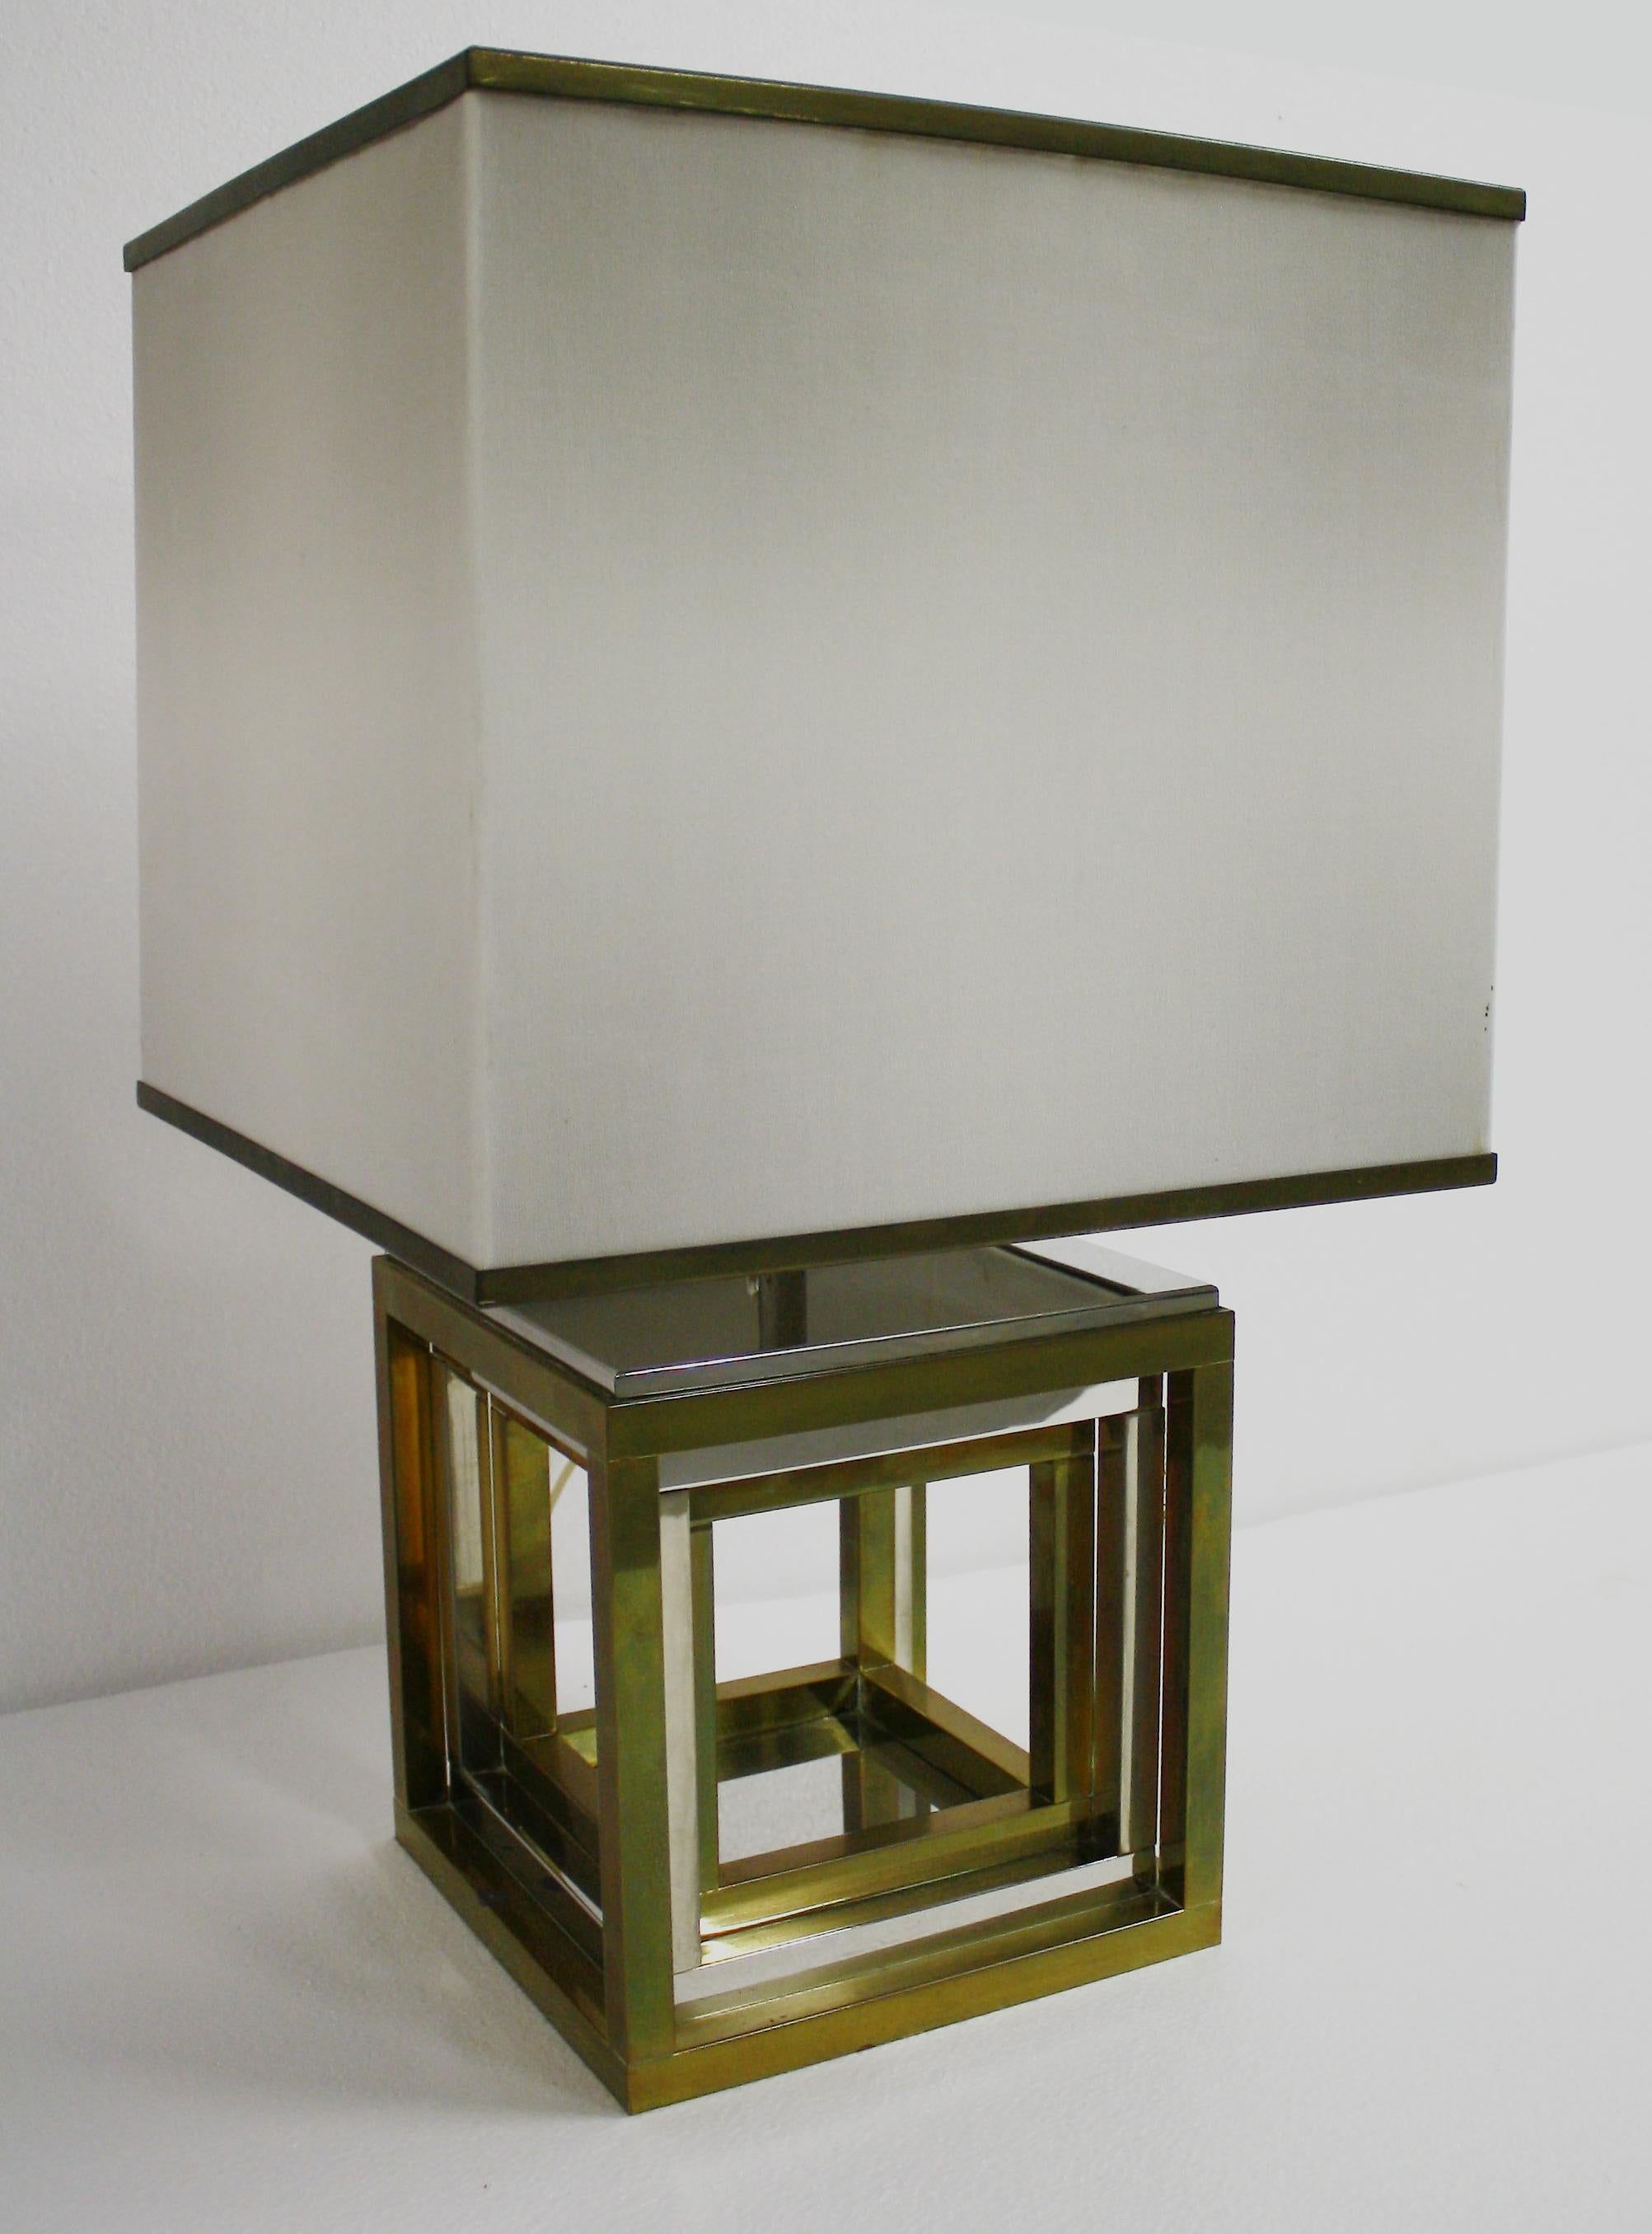 Impressive geometric design table lamp signed by Romeo Rega.

This cubist lamp has a mirrored plate on top and inside the lamp to create a lovely effect.

The lamp is made of patinated brass and chrome and signed at the bottom by the